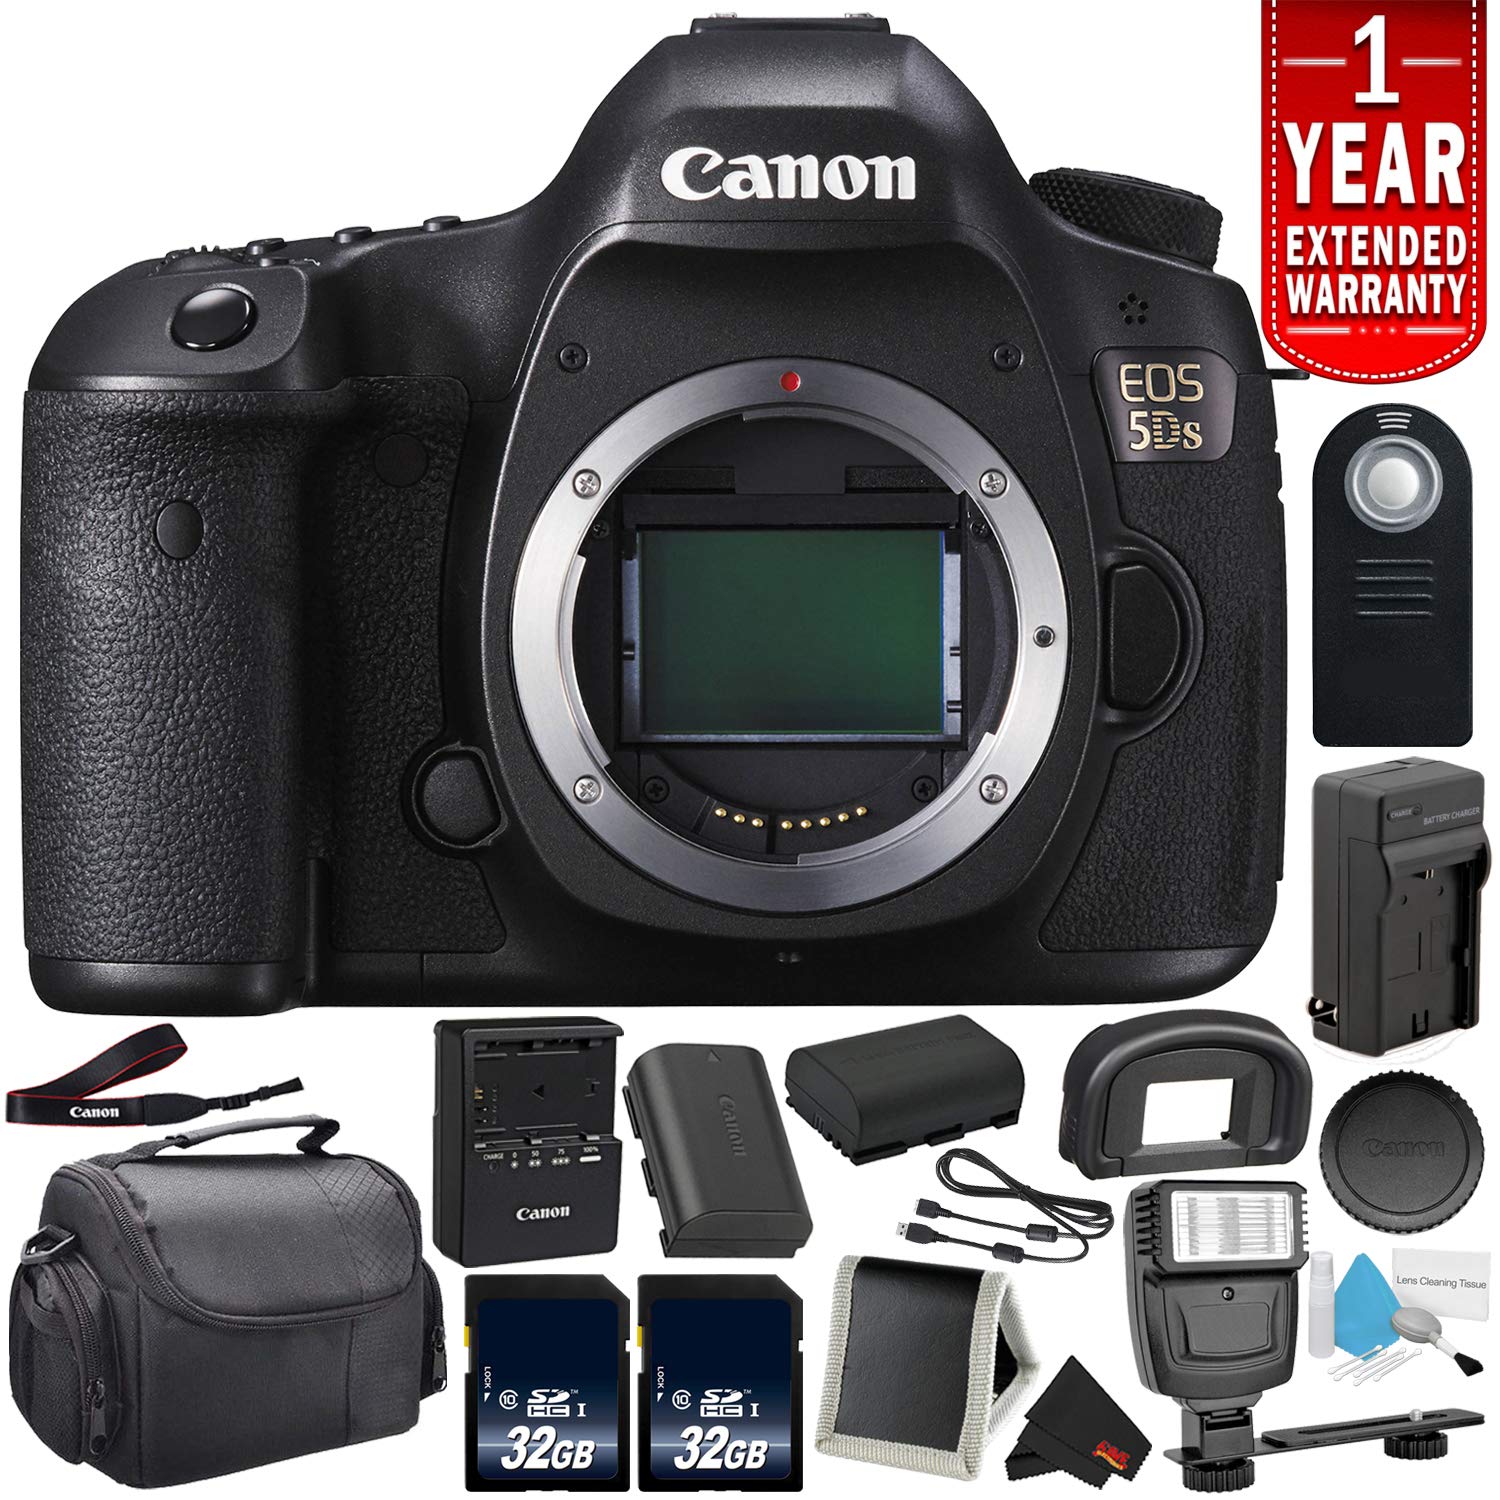 Canon EOS 5DS Digital SLR Camera 0581C002 (Body Only)- Bundle with 32GB Memory Card + Spare Battery Outdoor Bundle